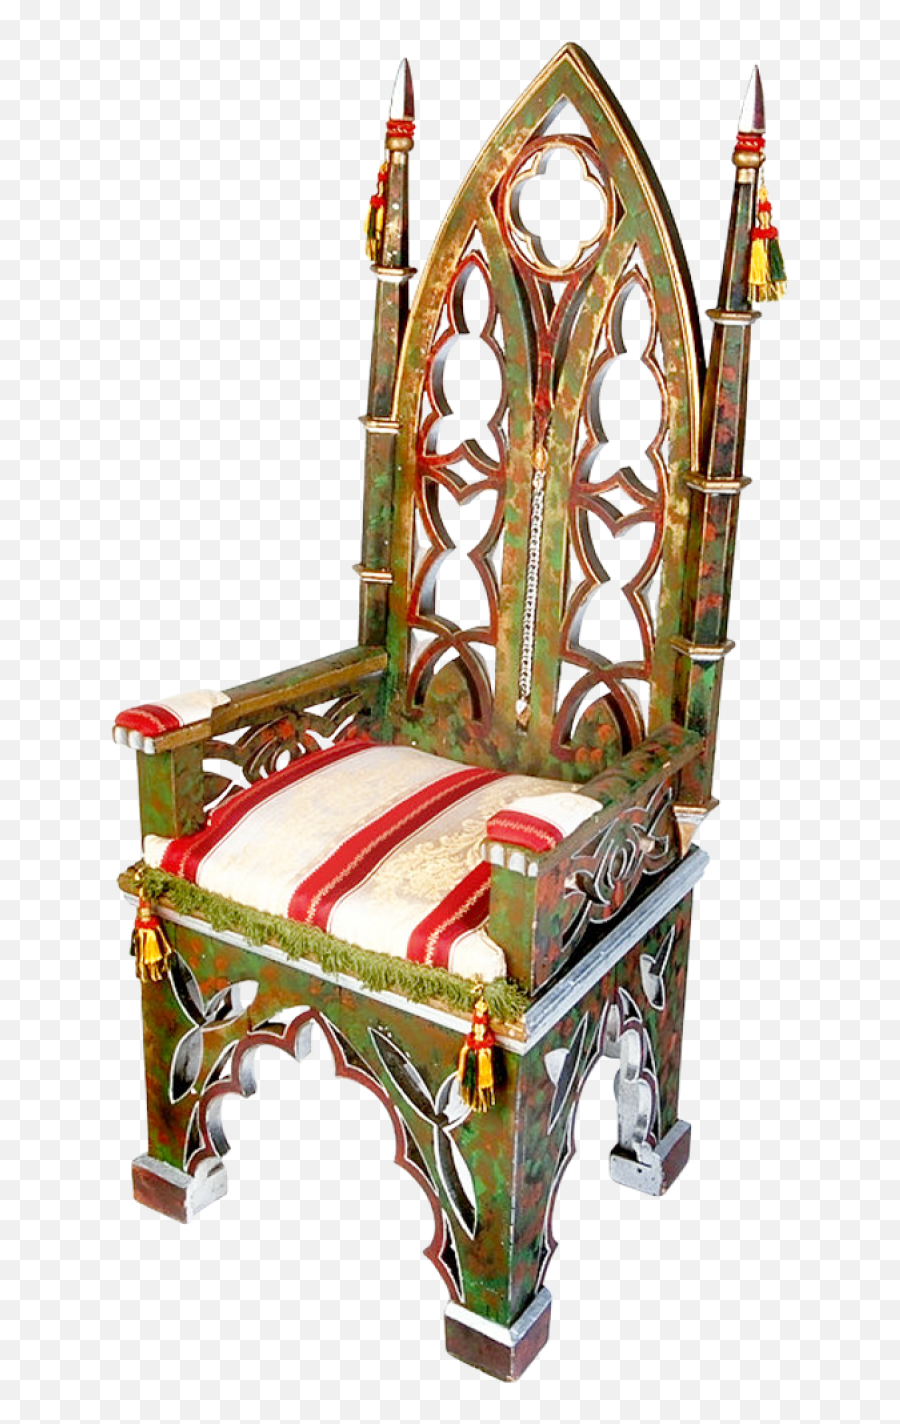 Chair Luxury Png Image - Purepng Free Transparent Cc0 Png Portable Network Graphics,Throne Chair Png